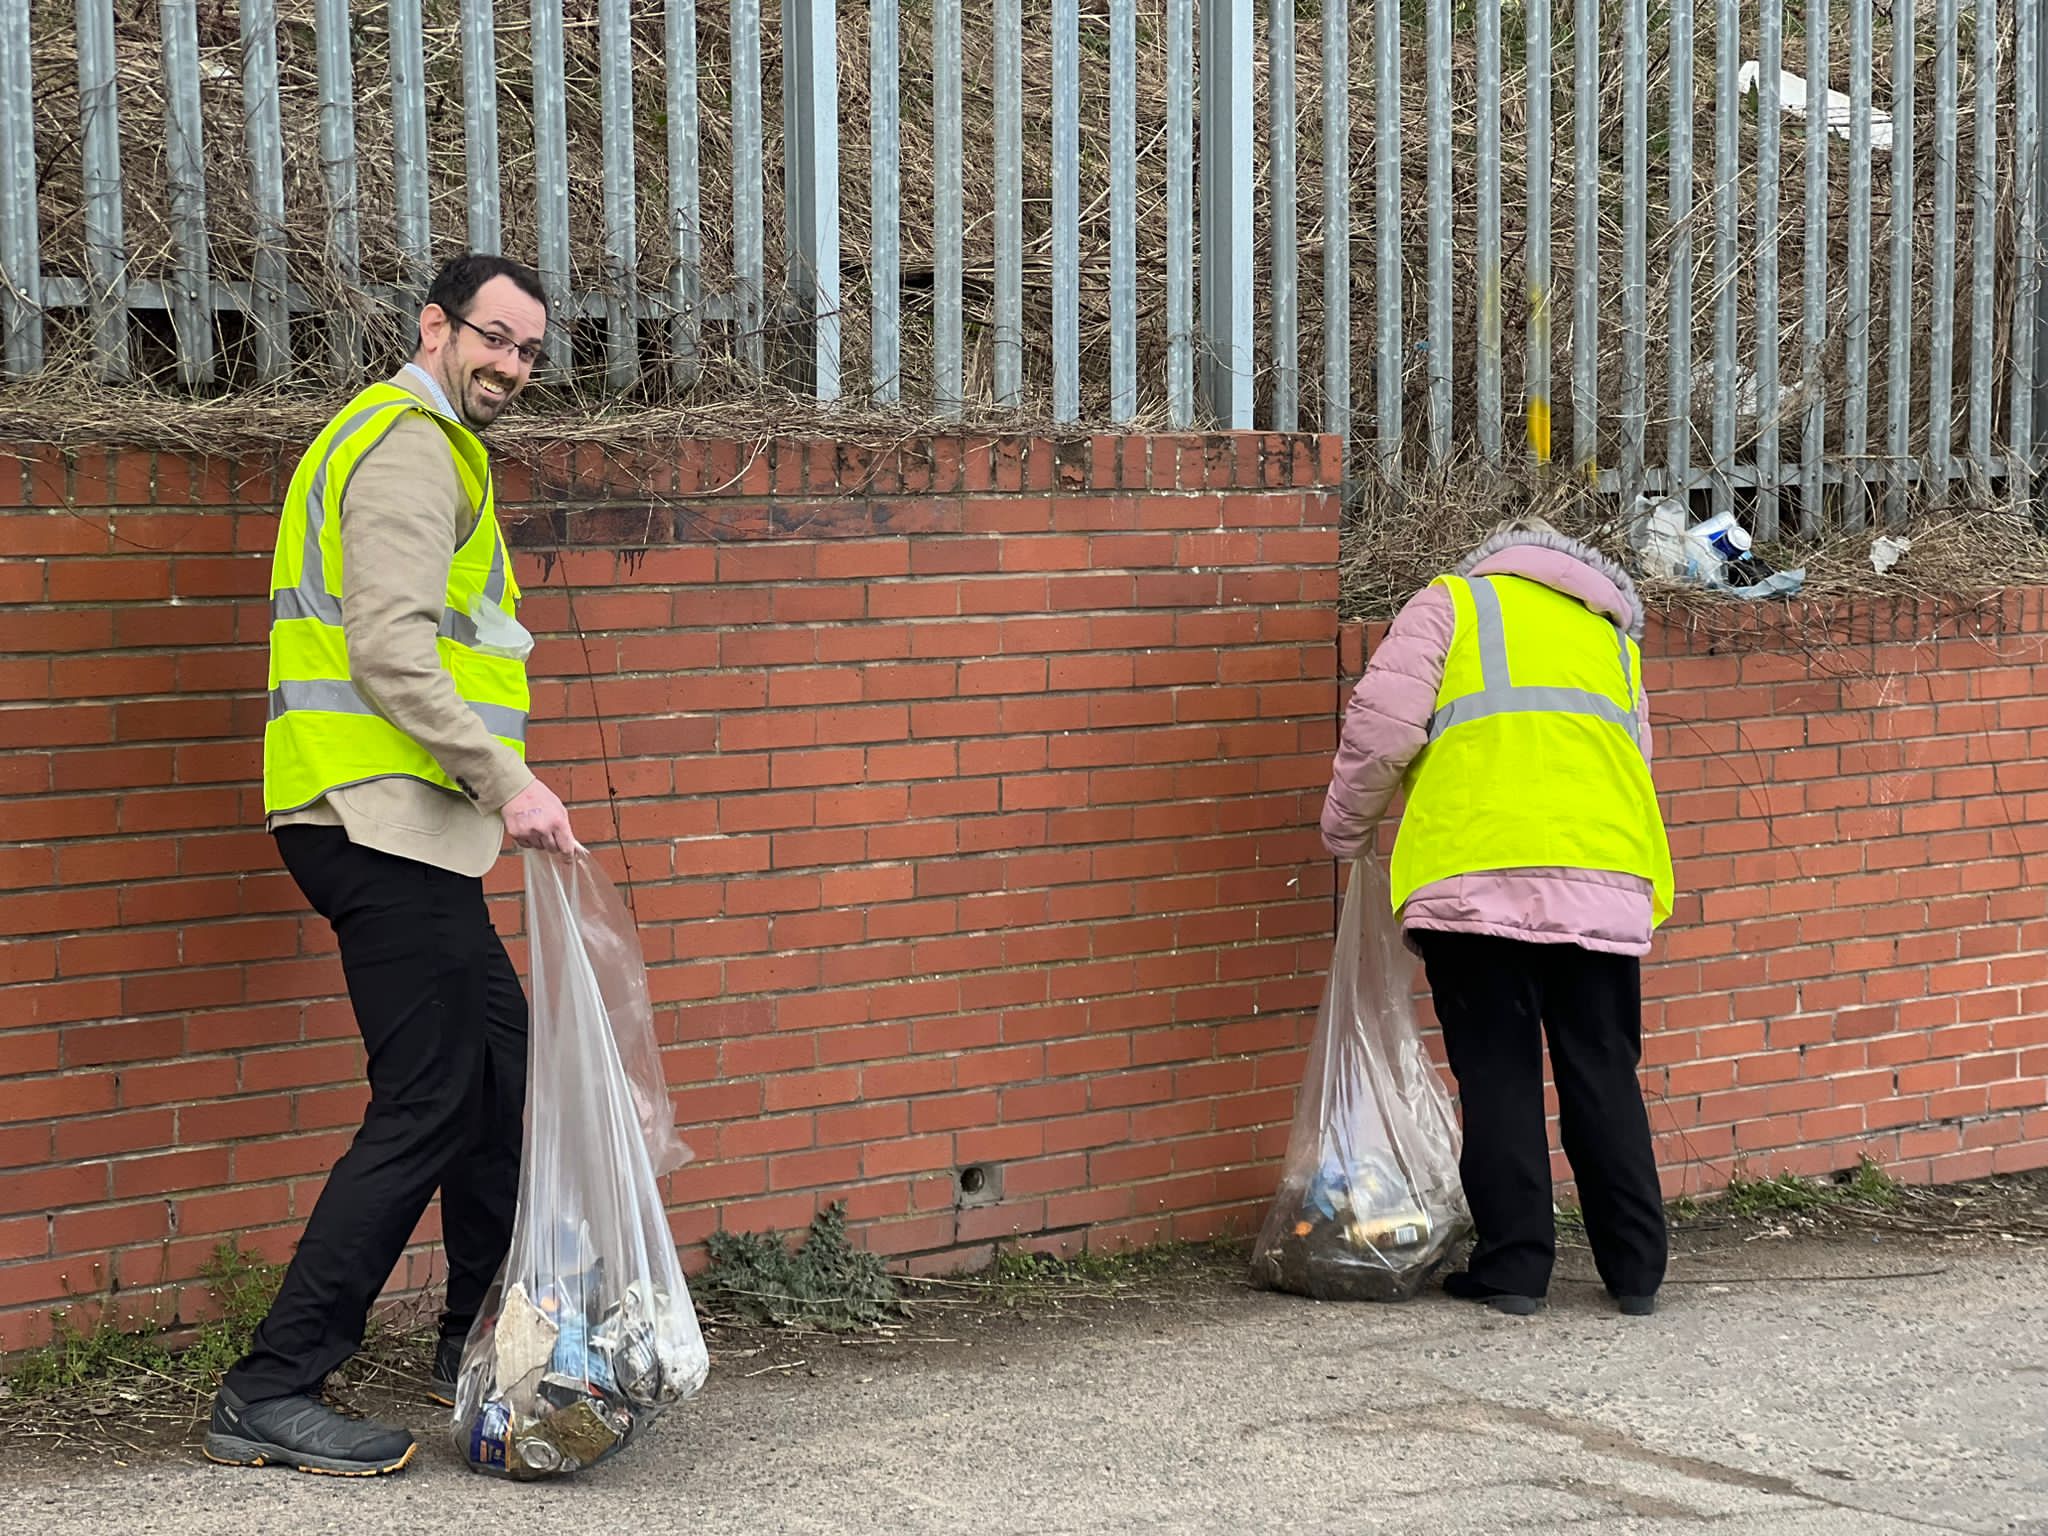 CPR Manufacturing did a litter pick on Meadow Lane, Alfreton